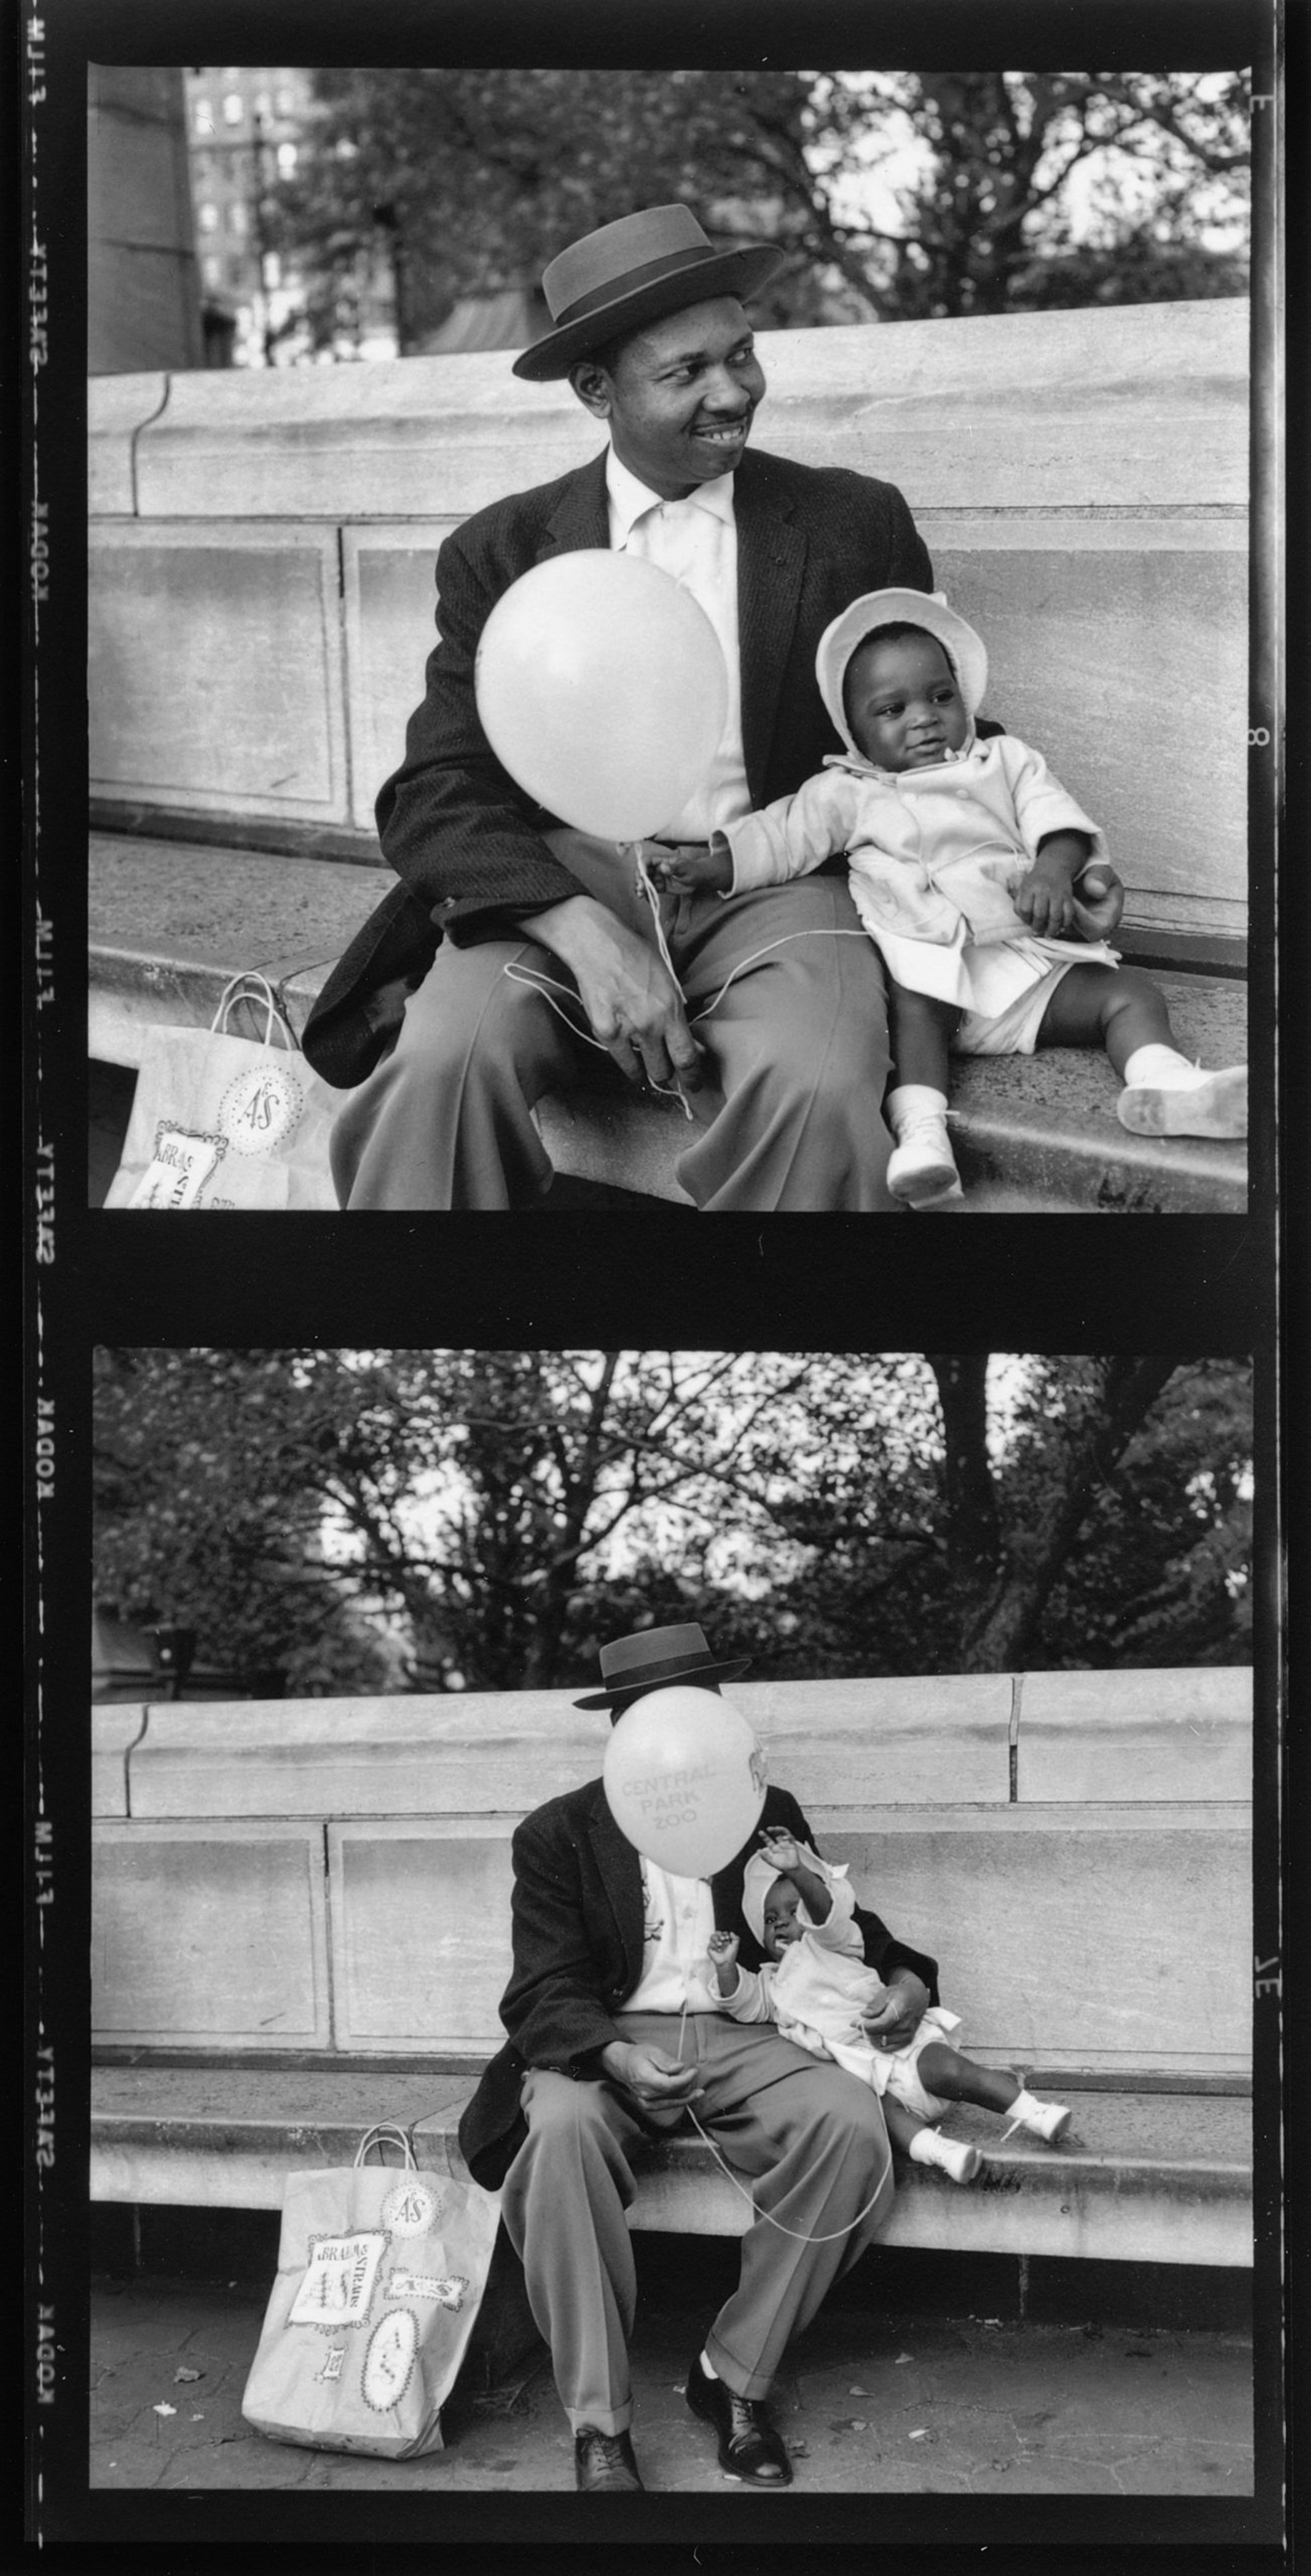 A photograph of a man sitting on a public bench with his baby, holding a balloon